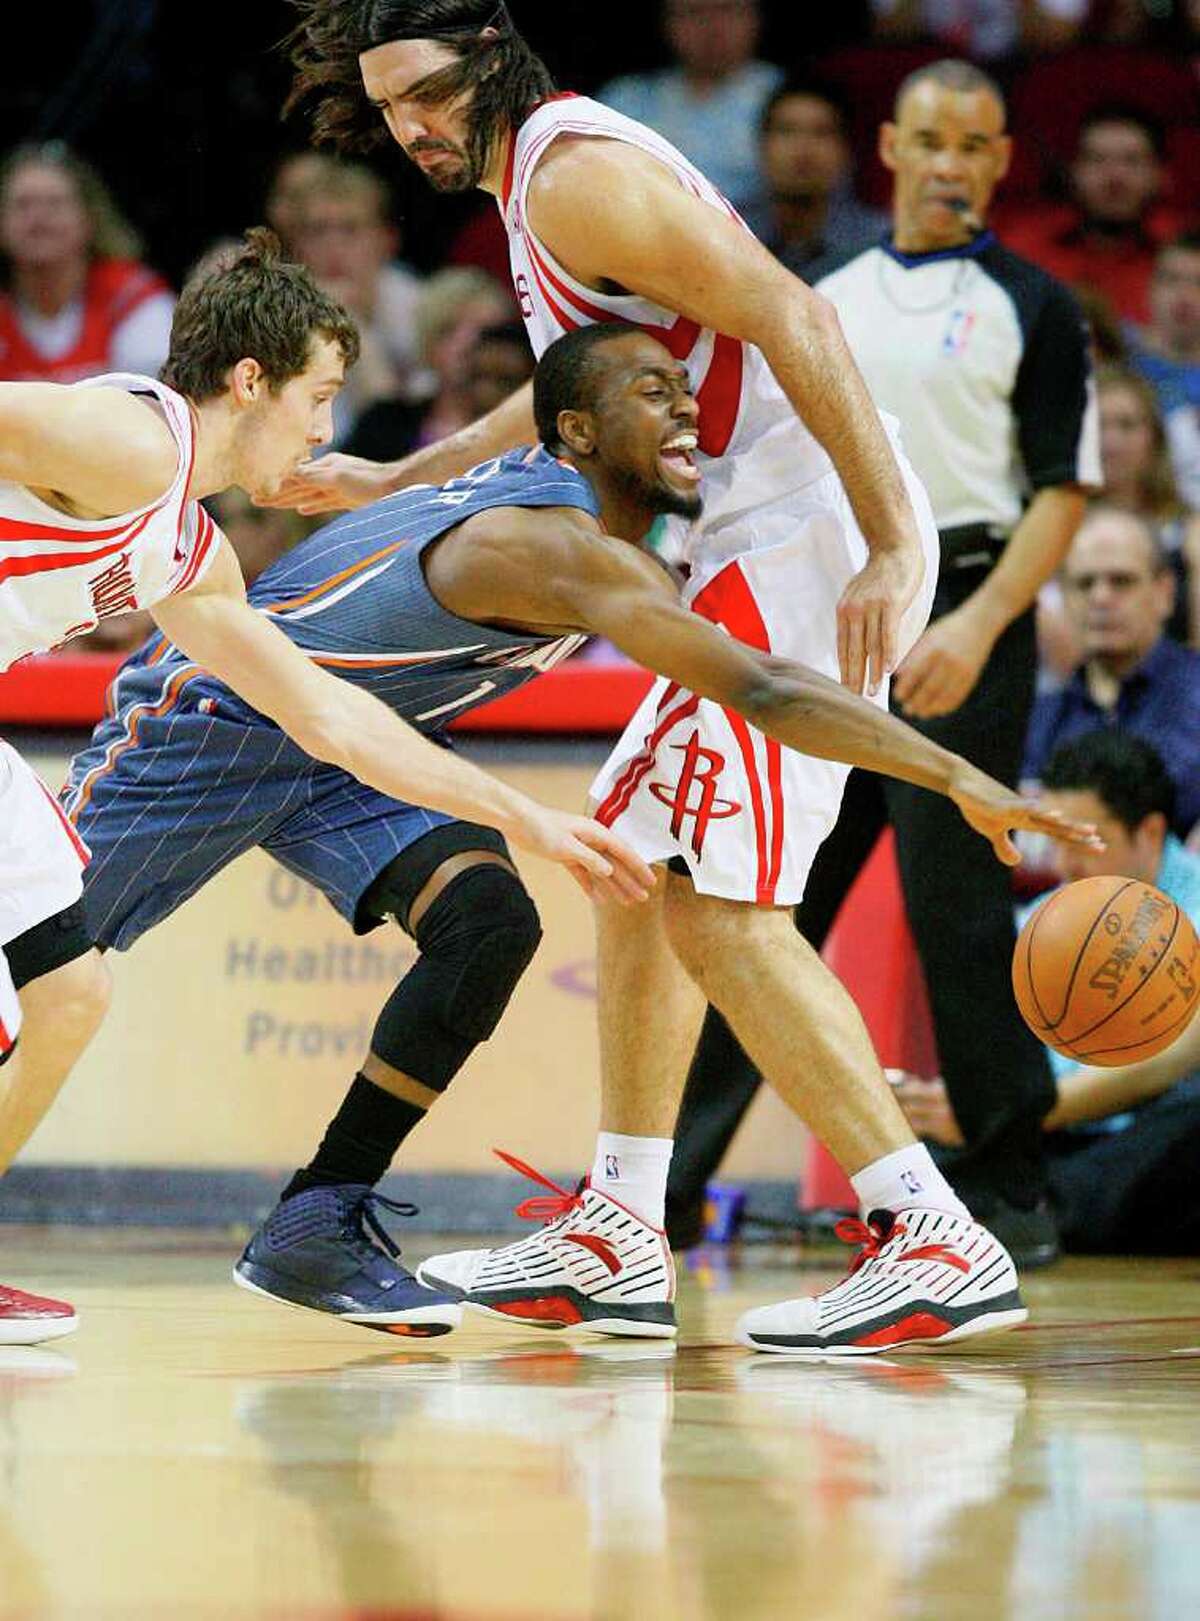 Houston Rockets point guard Goran Dragic (3) steals from Charlotte Bobcats point guard Kemba Walker (1) as Walker collides against Houston Rockets power forward Luis Scola (4) in the first period during the basketball game at Toyota Center on Wednesday, March 14, 2012, in Houston.